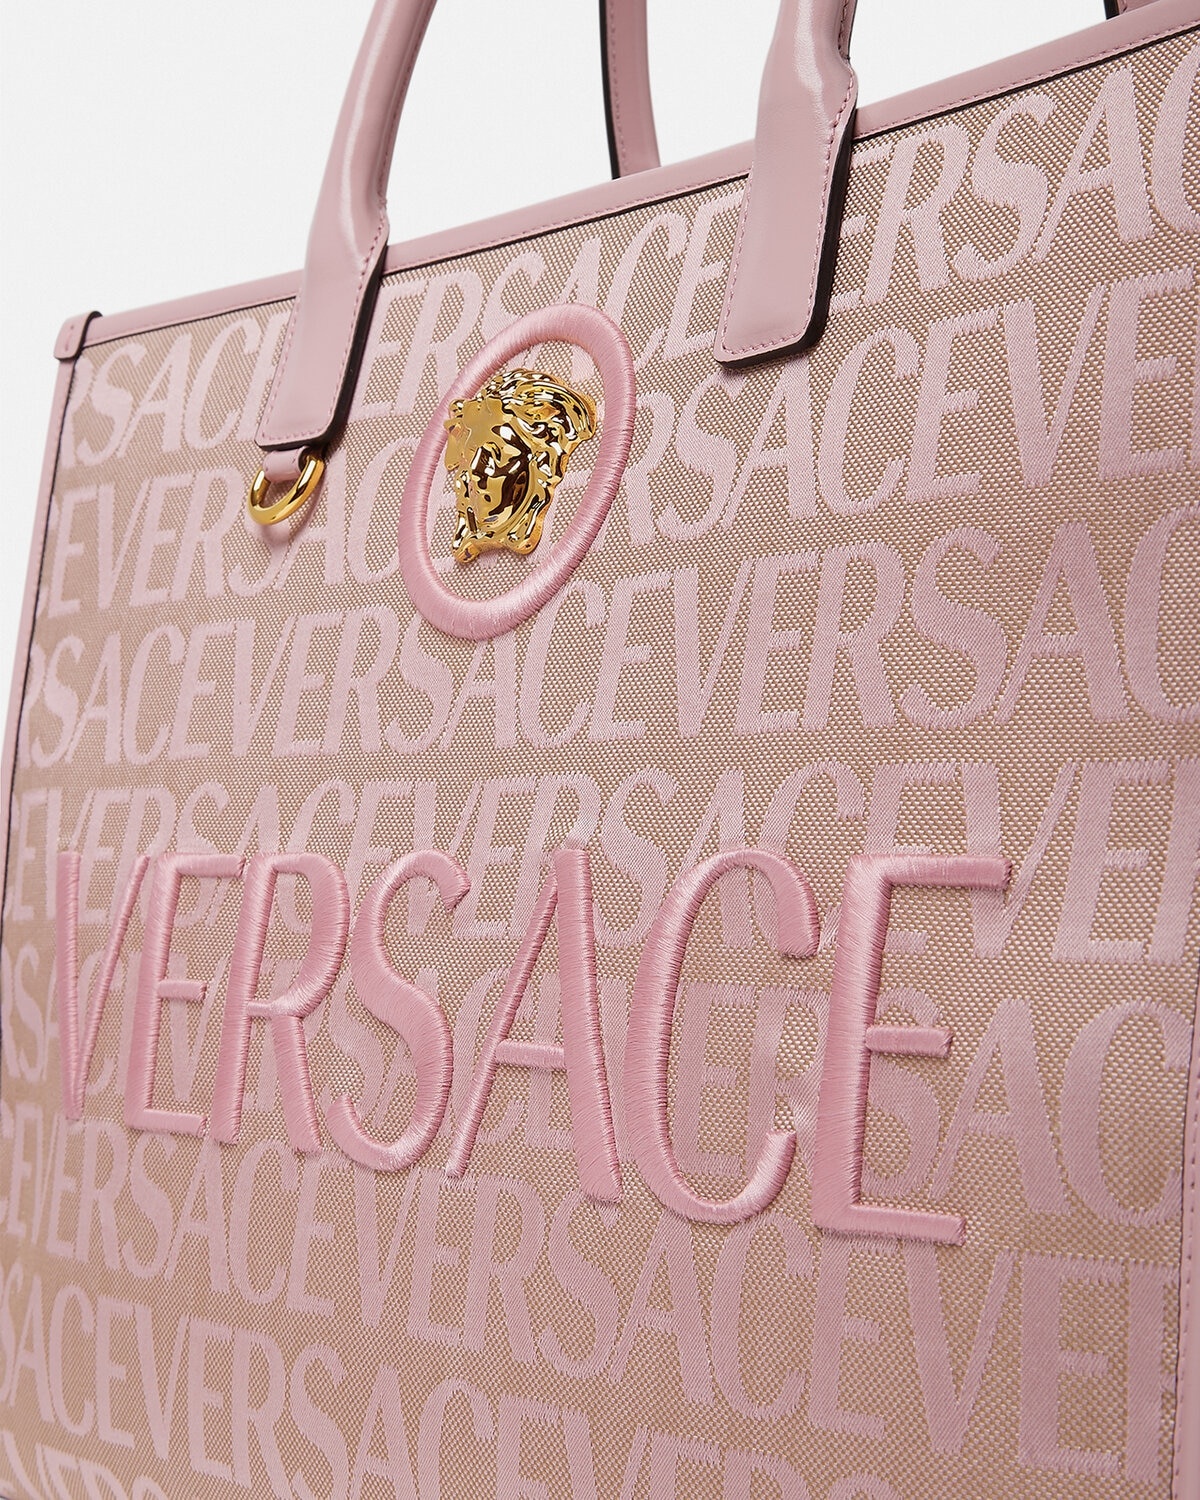 VERSACE Versace Allover Large Tote Bag